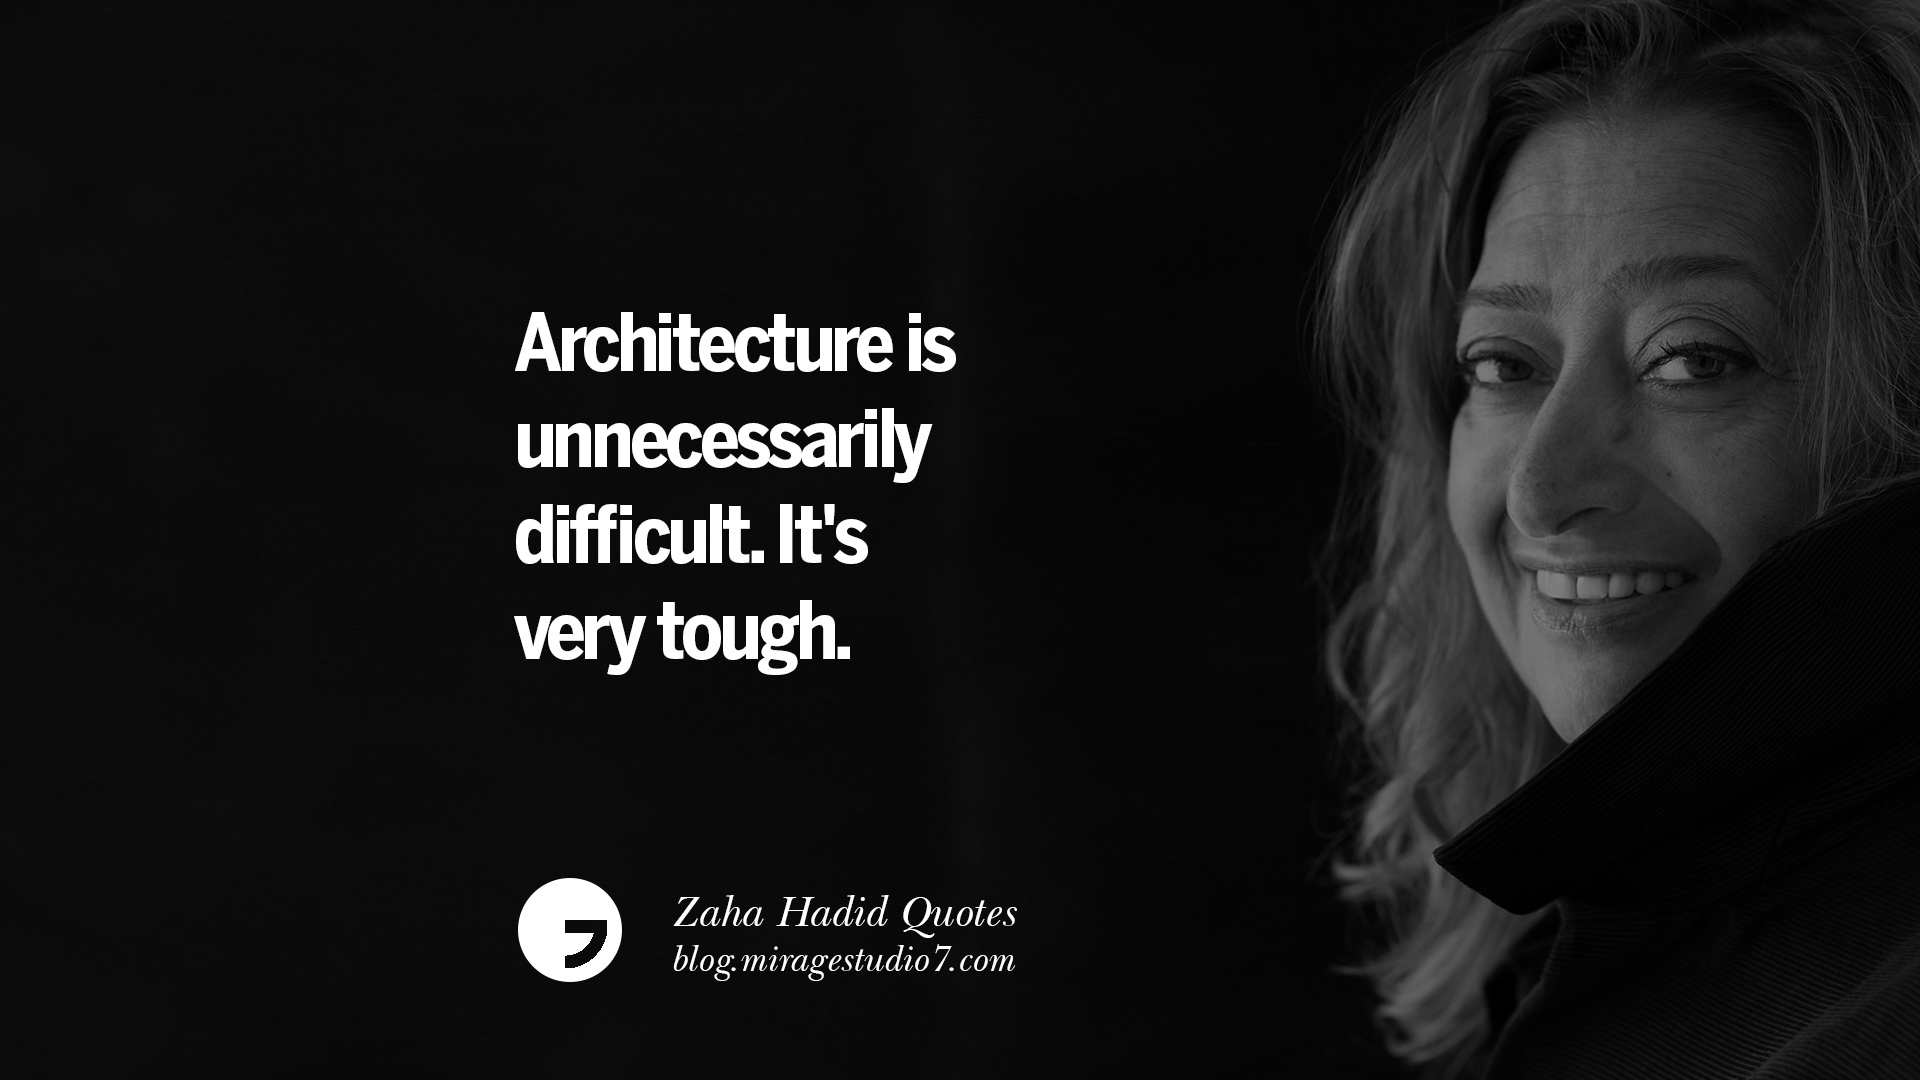 Great Zaha Hadid Quotes in the world Check it out now 